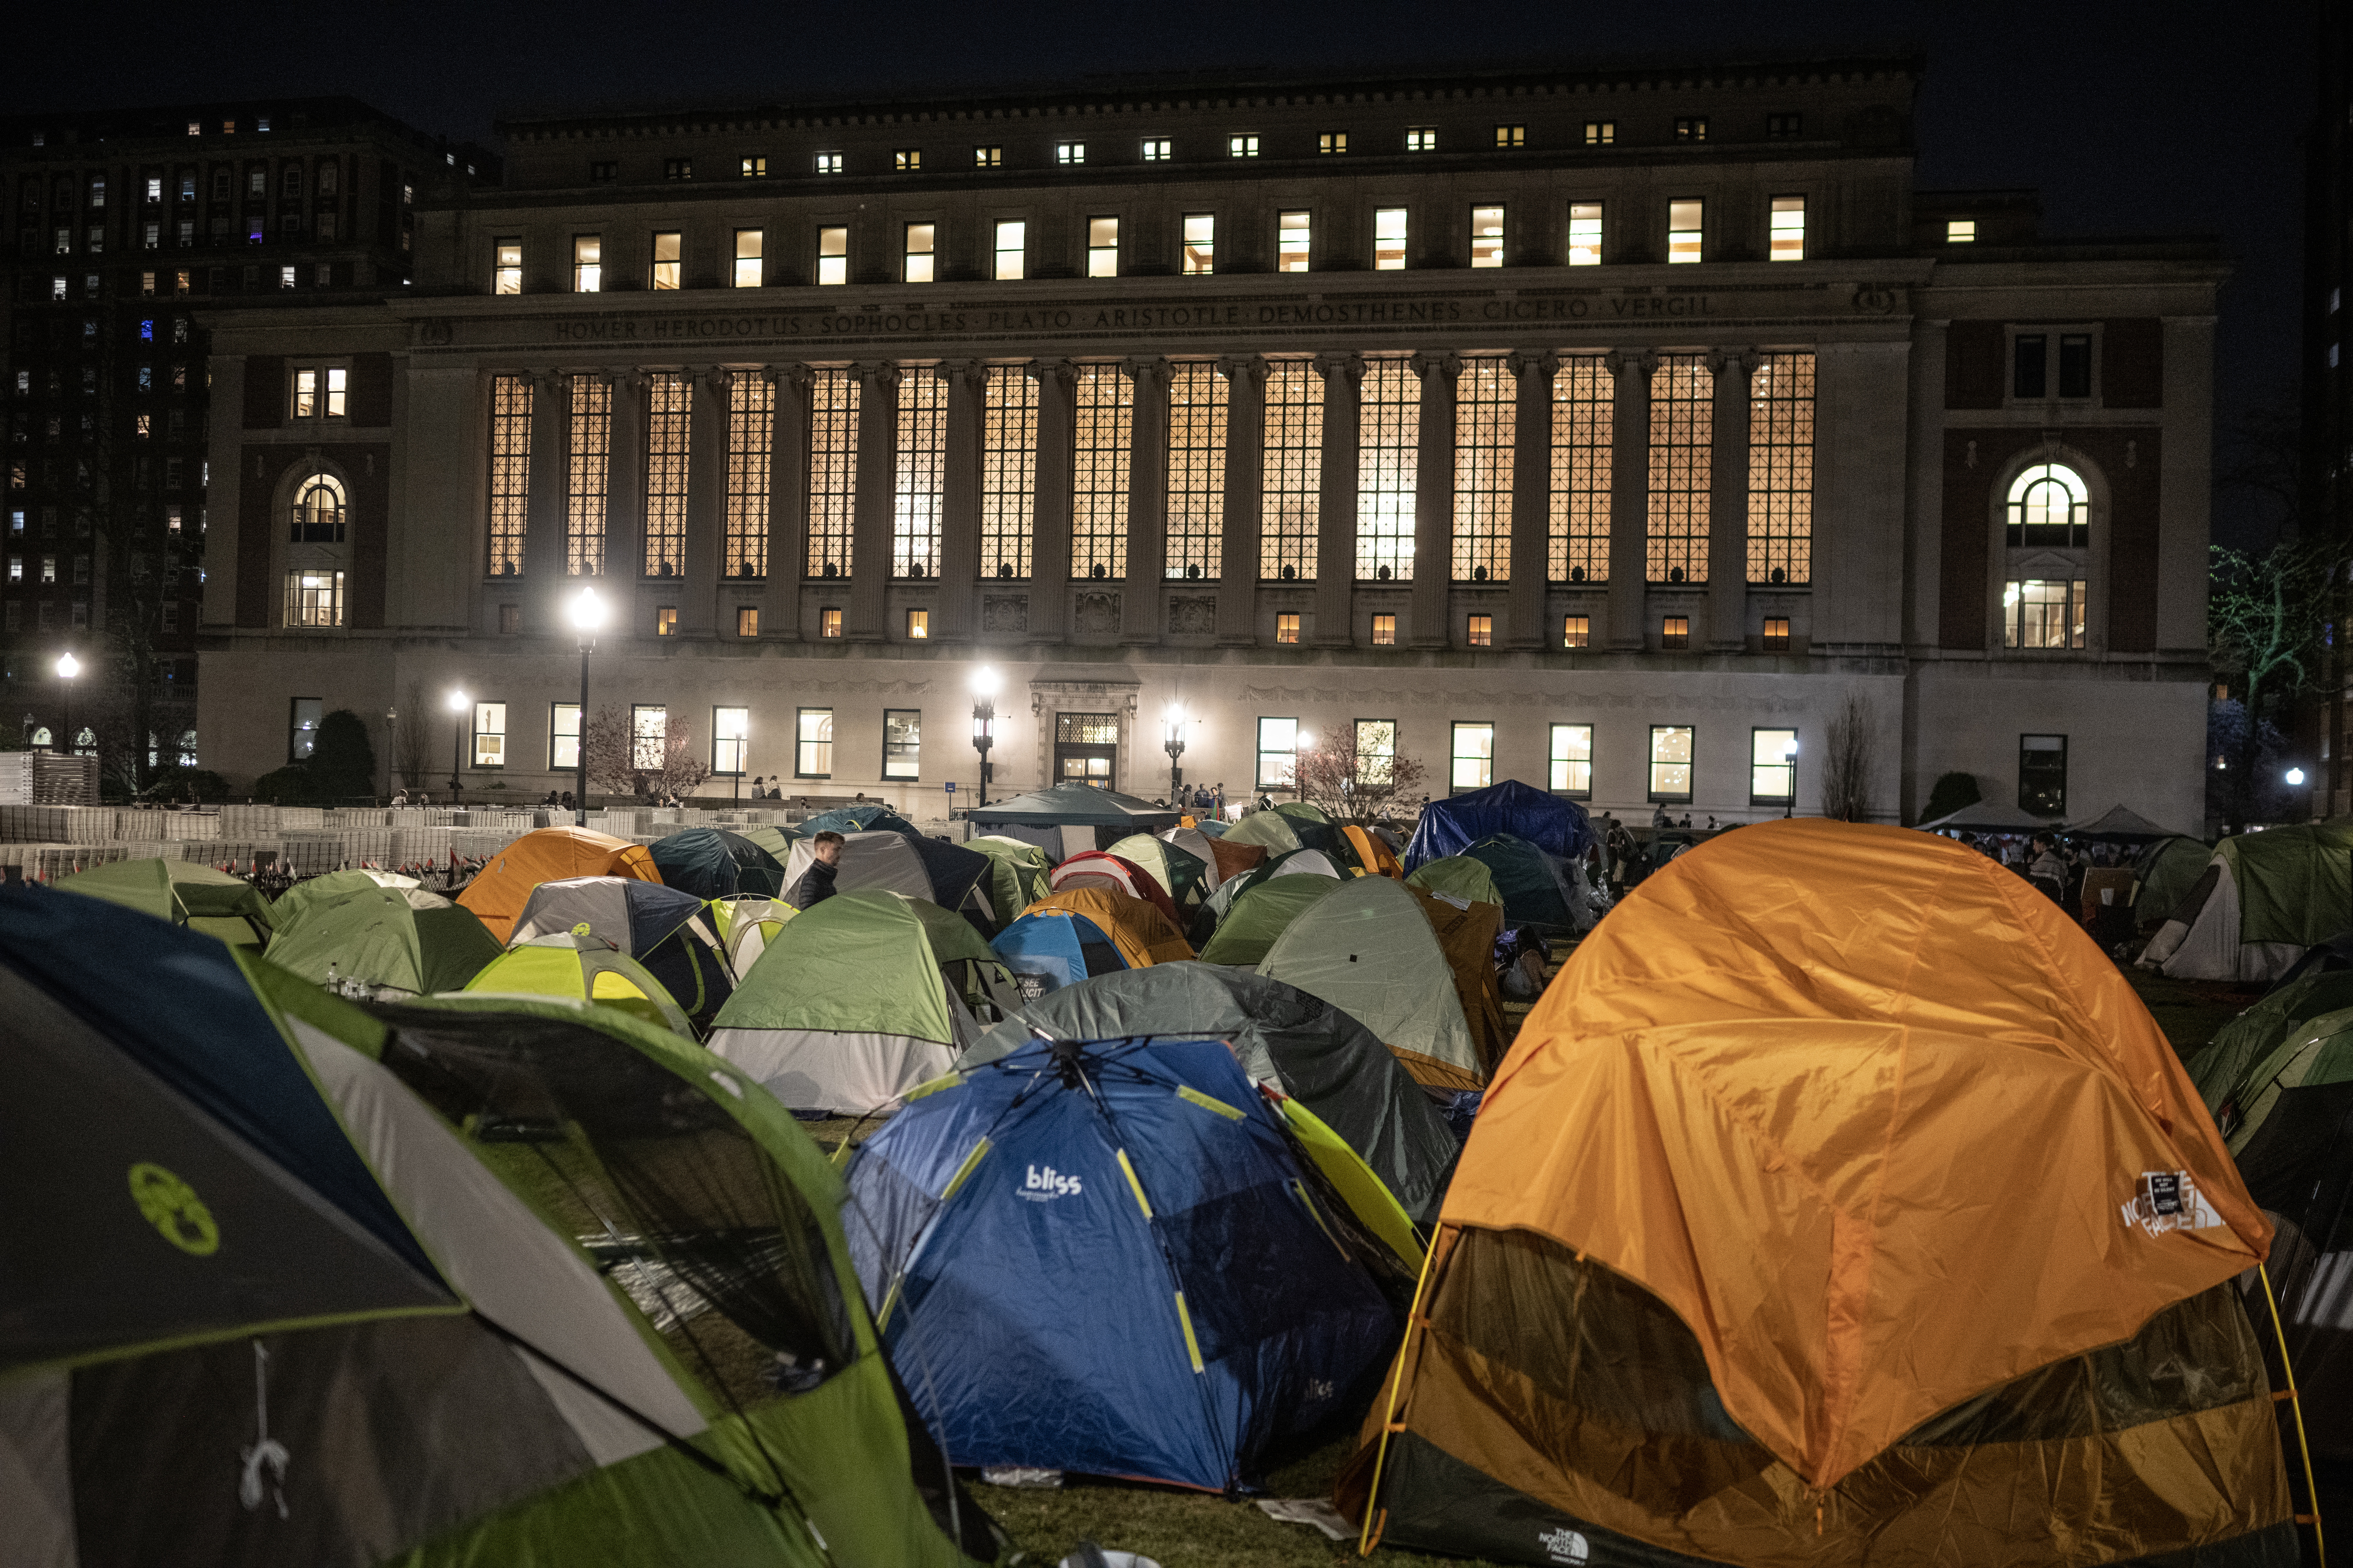 america’s tents are pitched on shameful truths